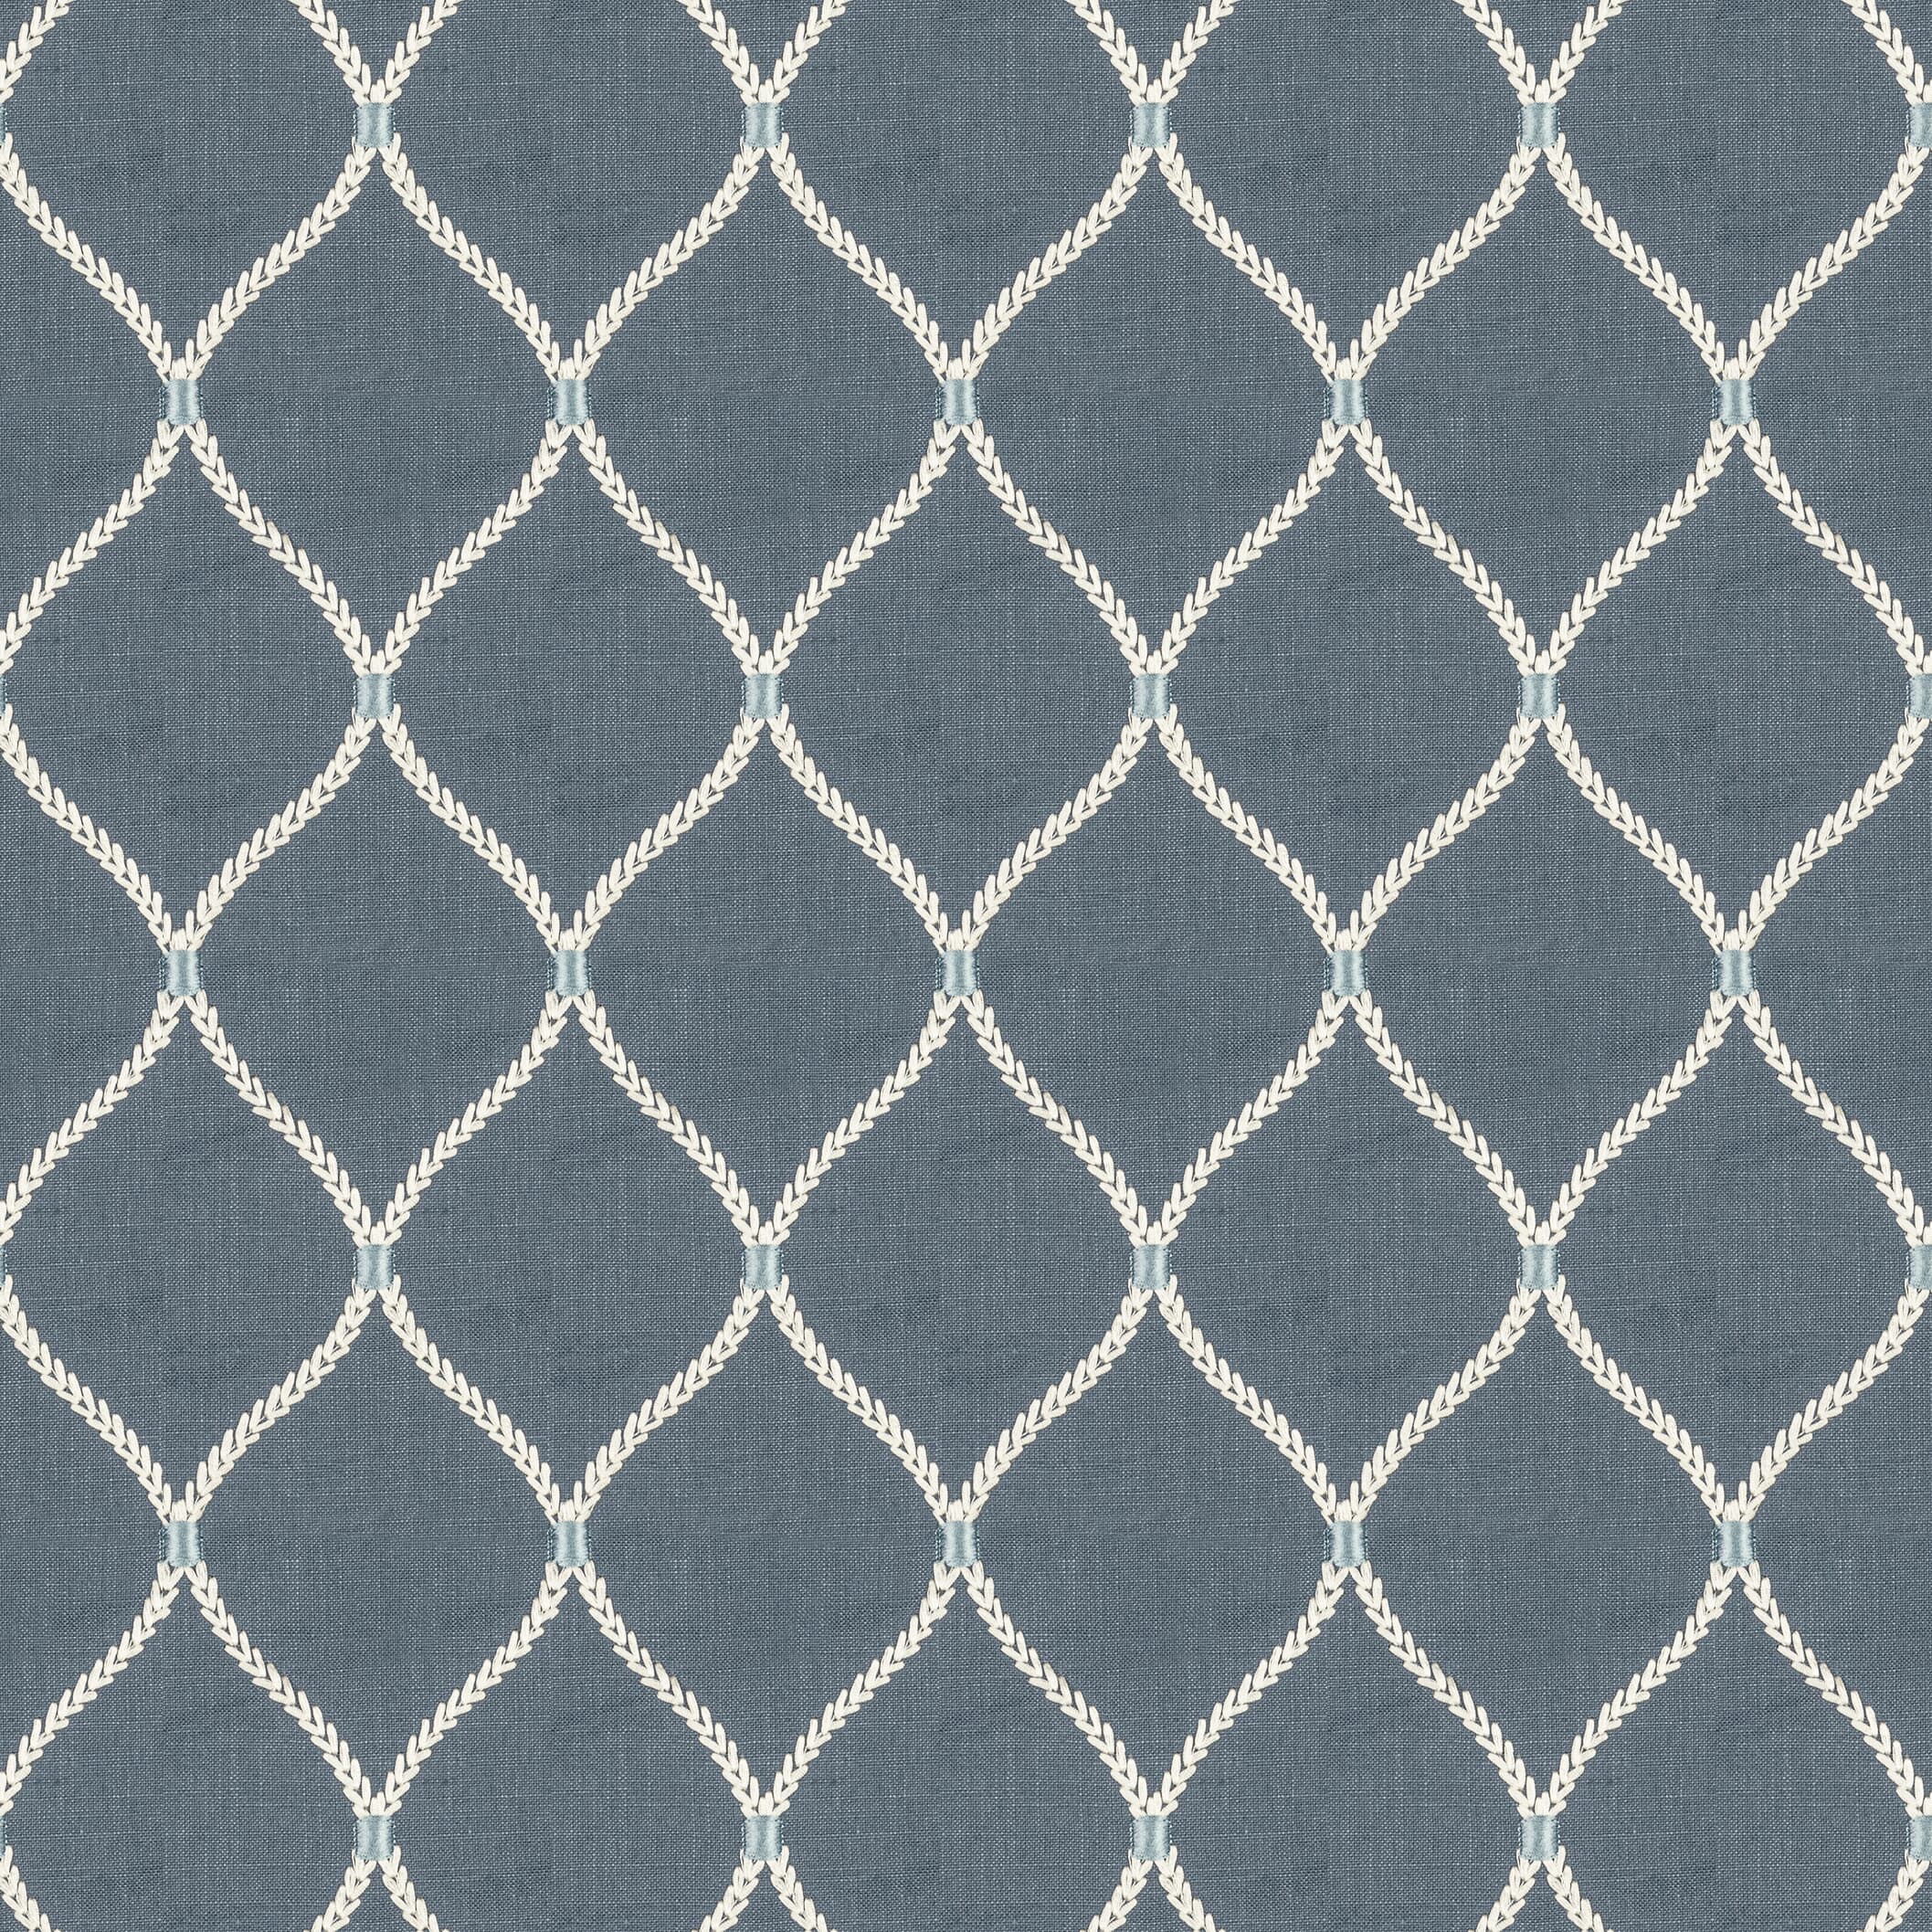 Flicks 11 Dresden by Stout Fabric